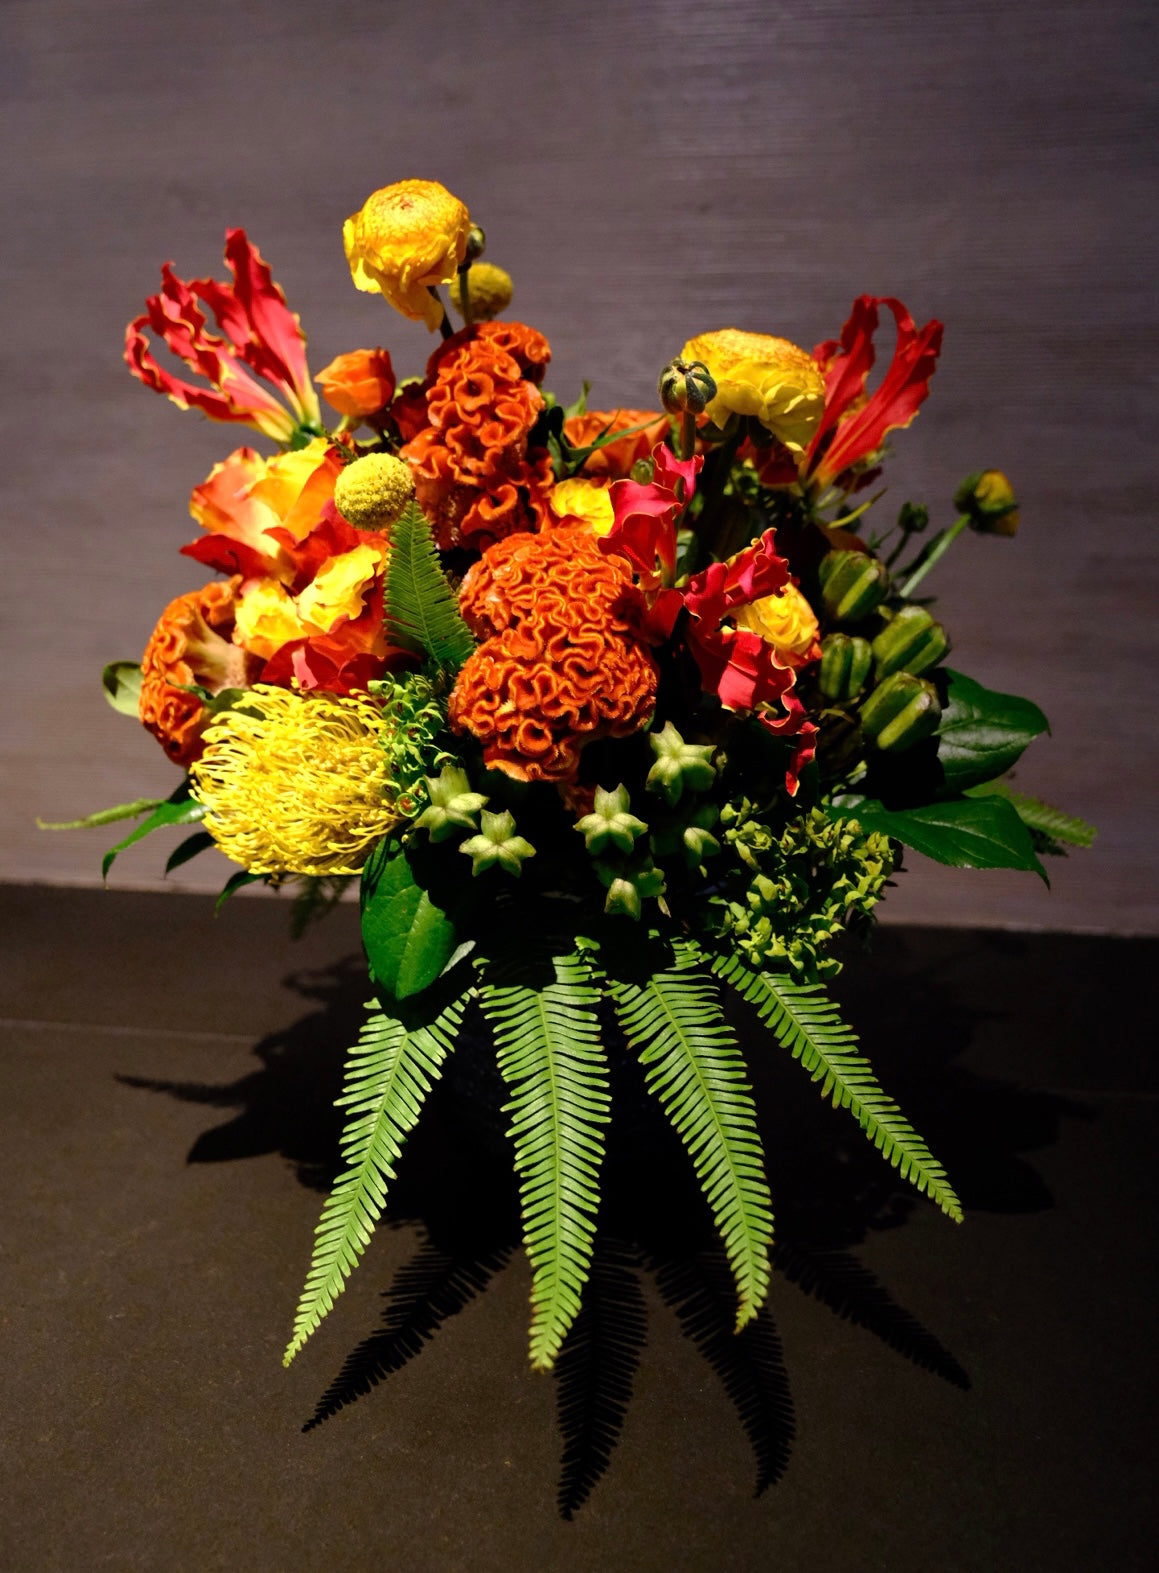 t is creative and high-end design. With four stems of Umbrella Fern, we created two dancers holding the most painterly flowers. A bundle of cockscomb blooms introduces movement. At the back two fire lilies protect the whole arrangement. 